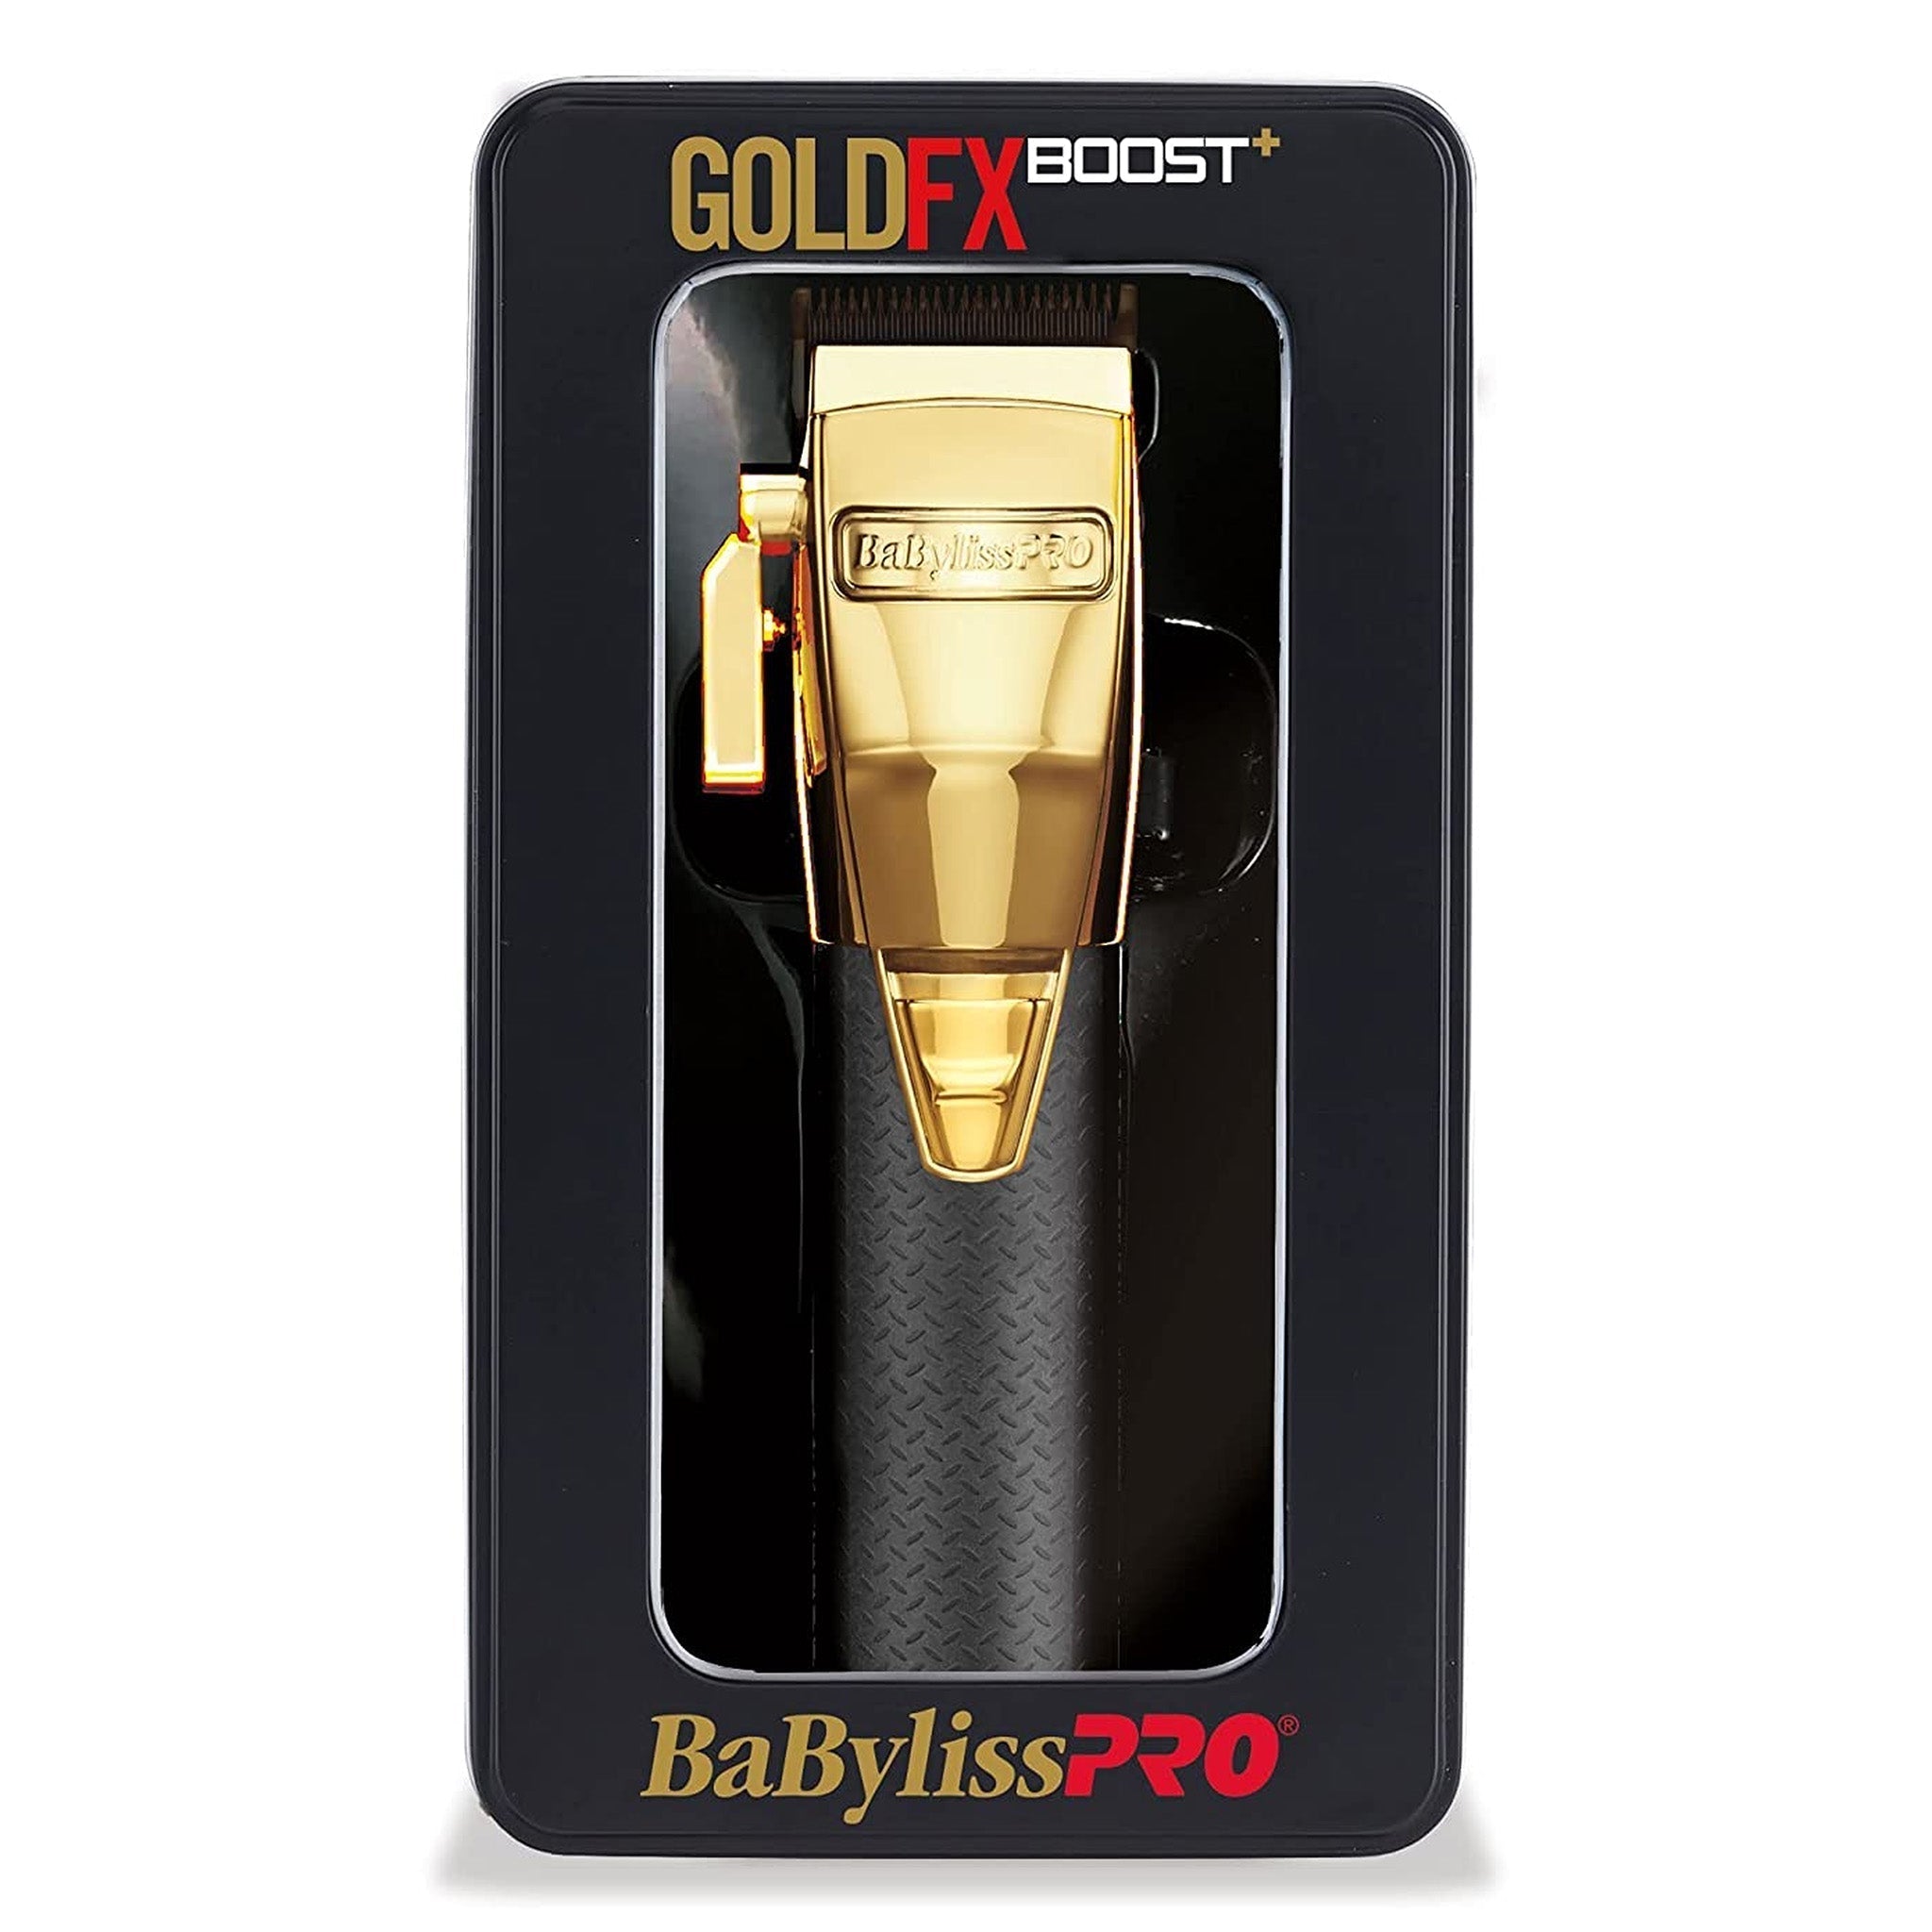 Babyliss Pro Goldfx Boost Metal Cord/Cordless Lithium-ion 